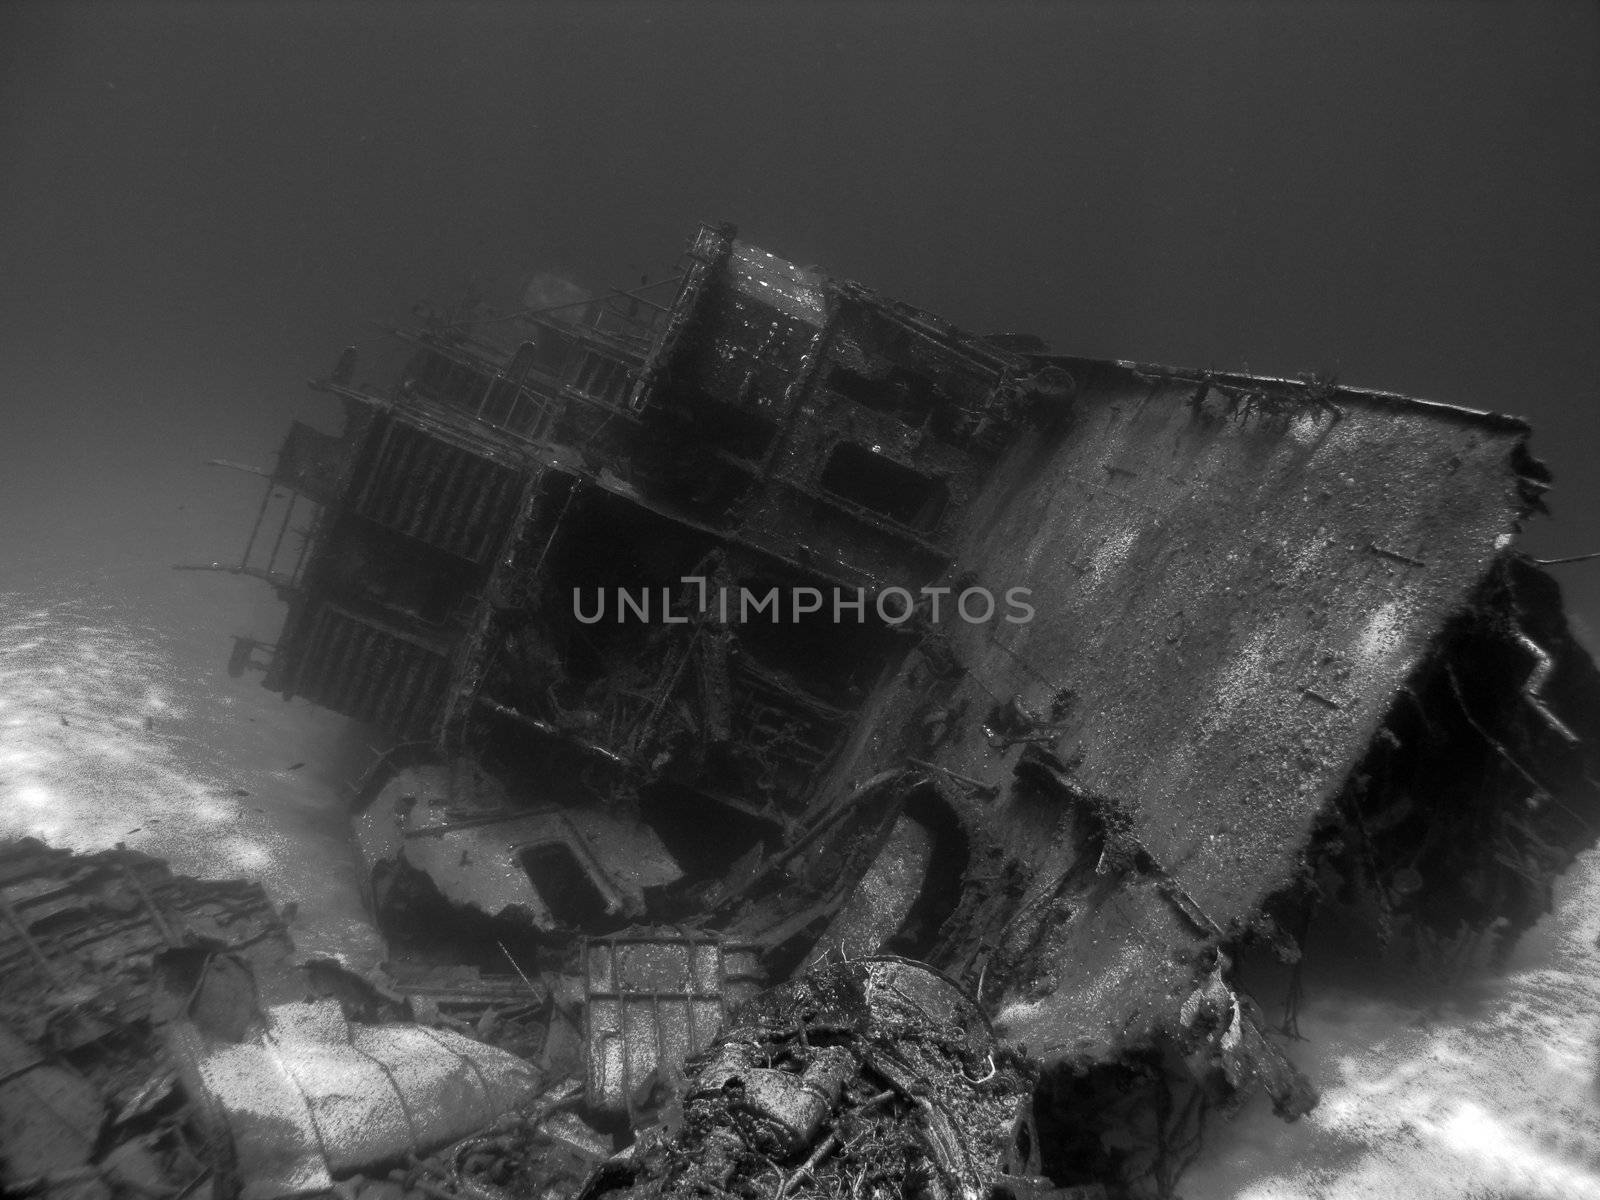 Undwerwater Shipwreck in Black and White by KevinPanizza